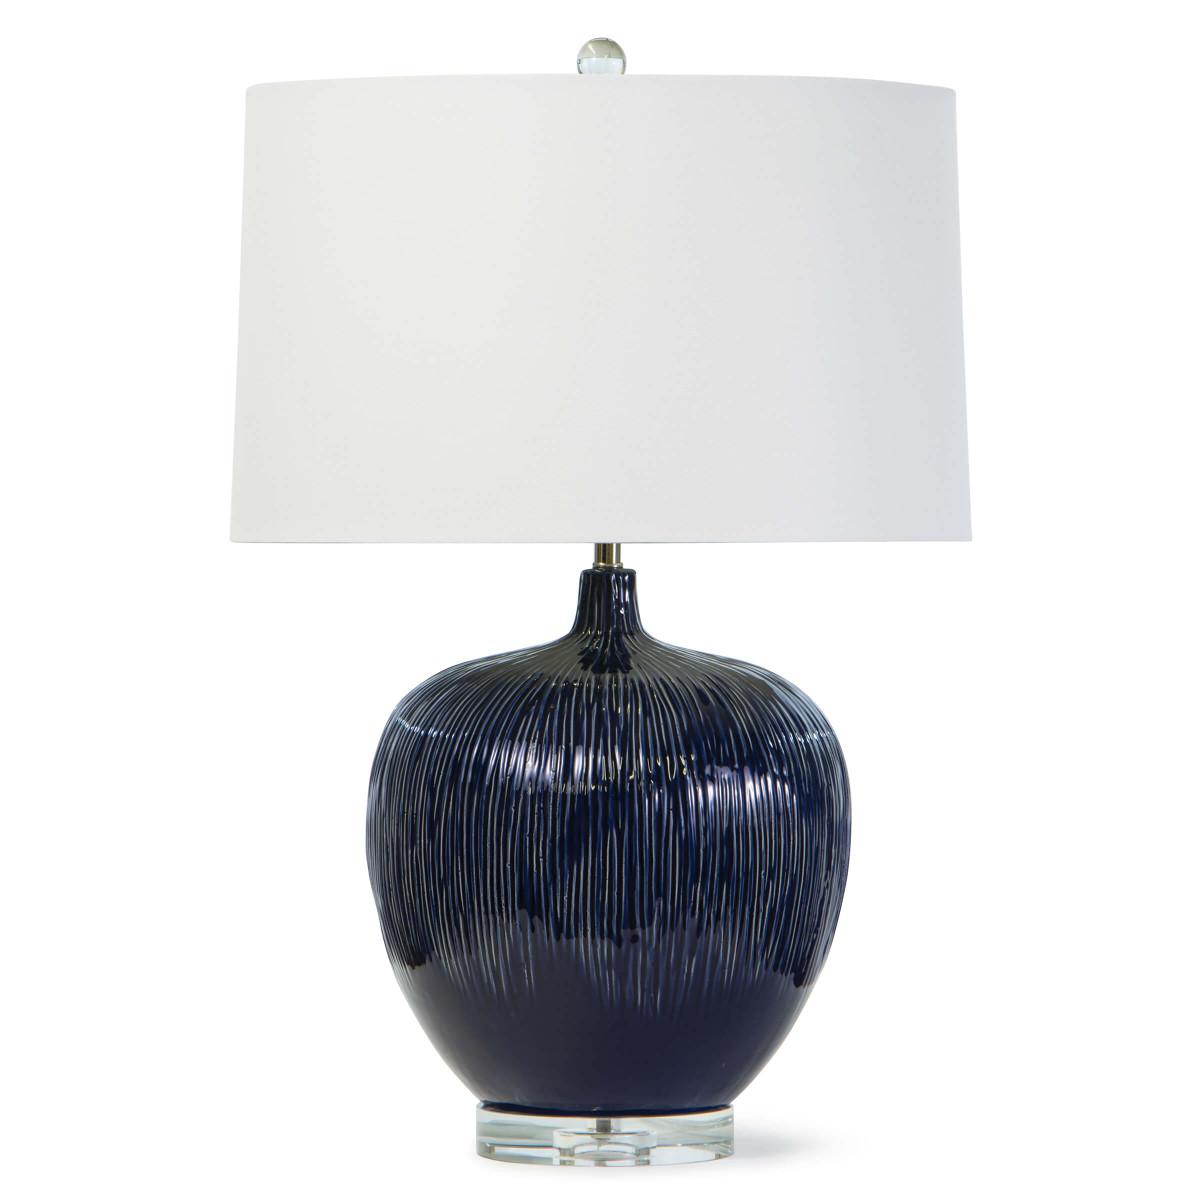 Wisteria Table Lamp - Navy